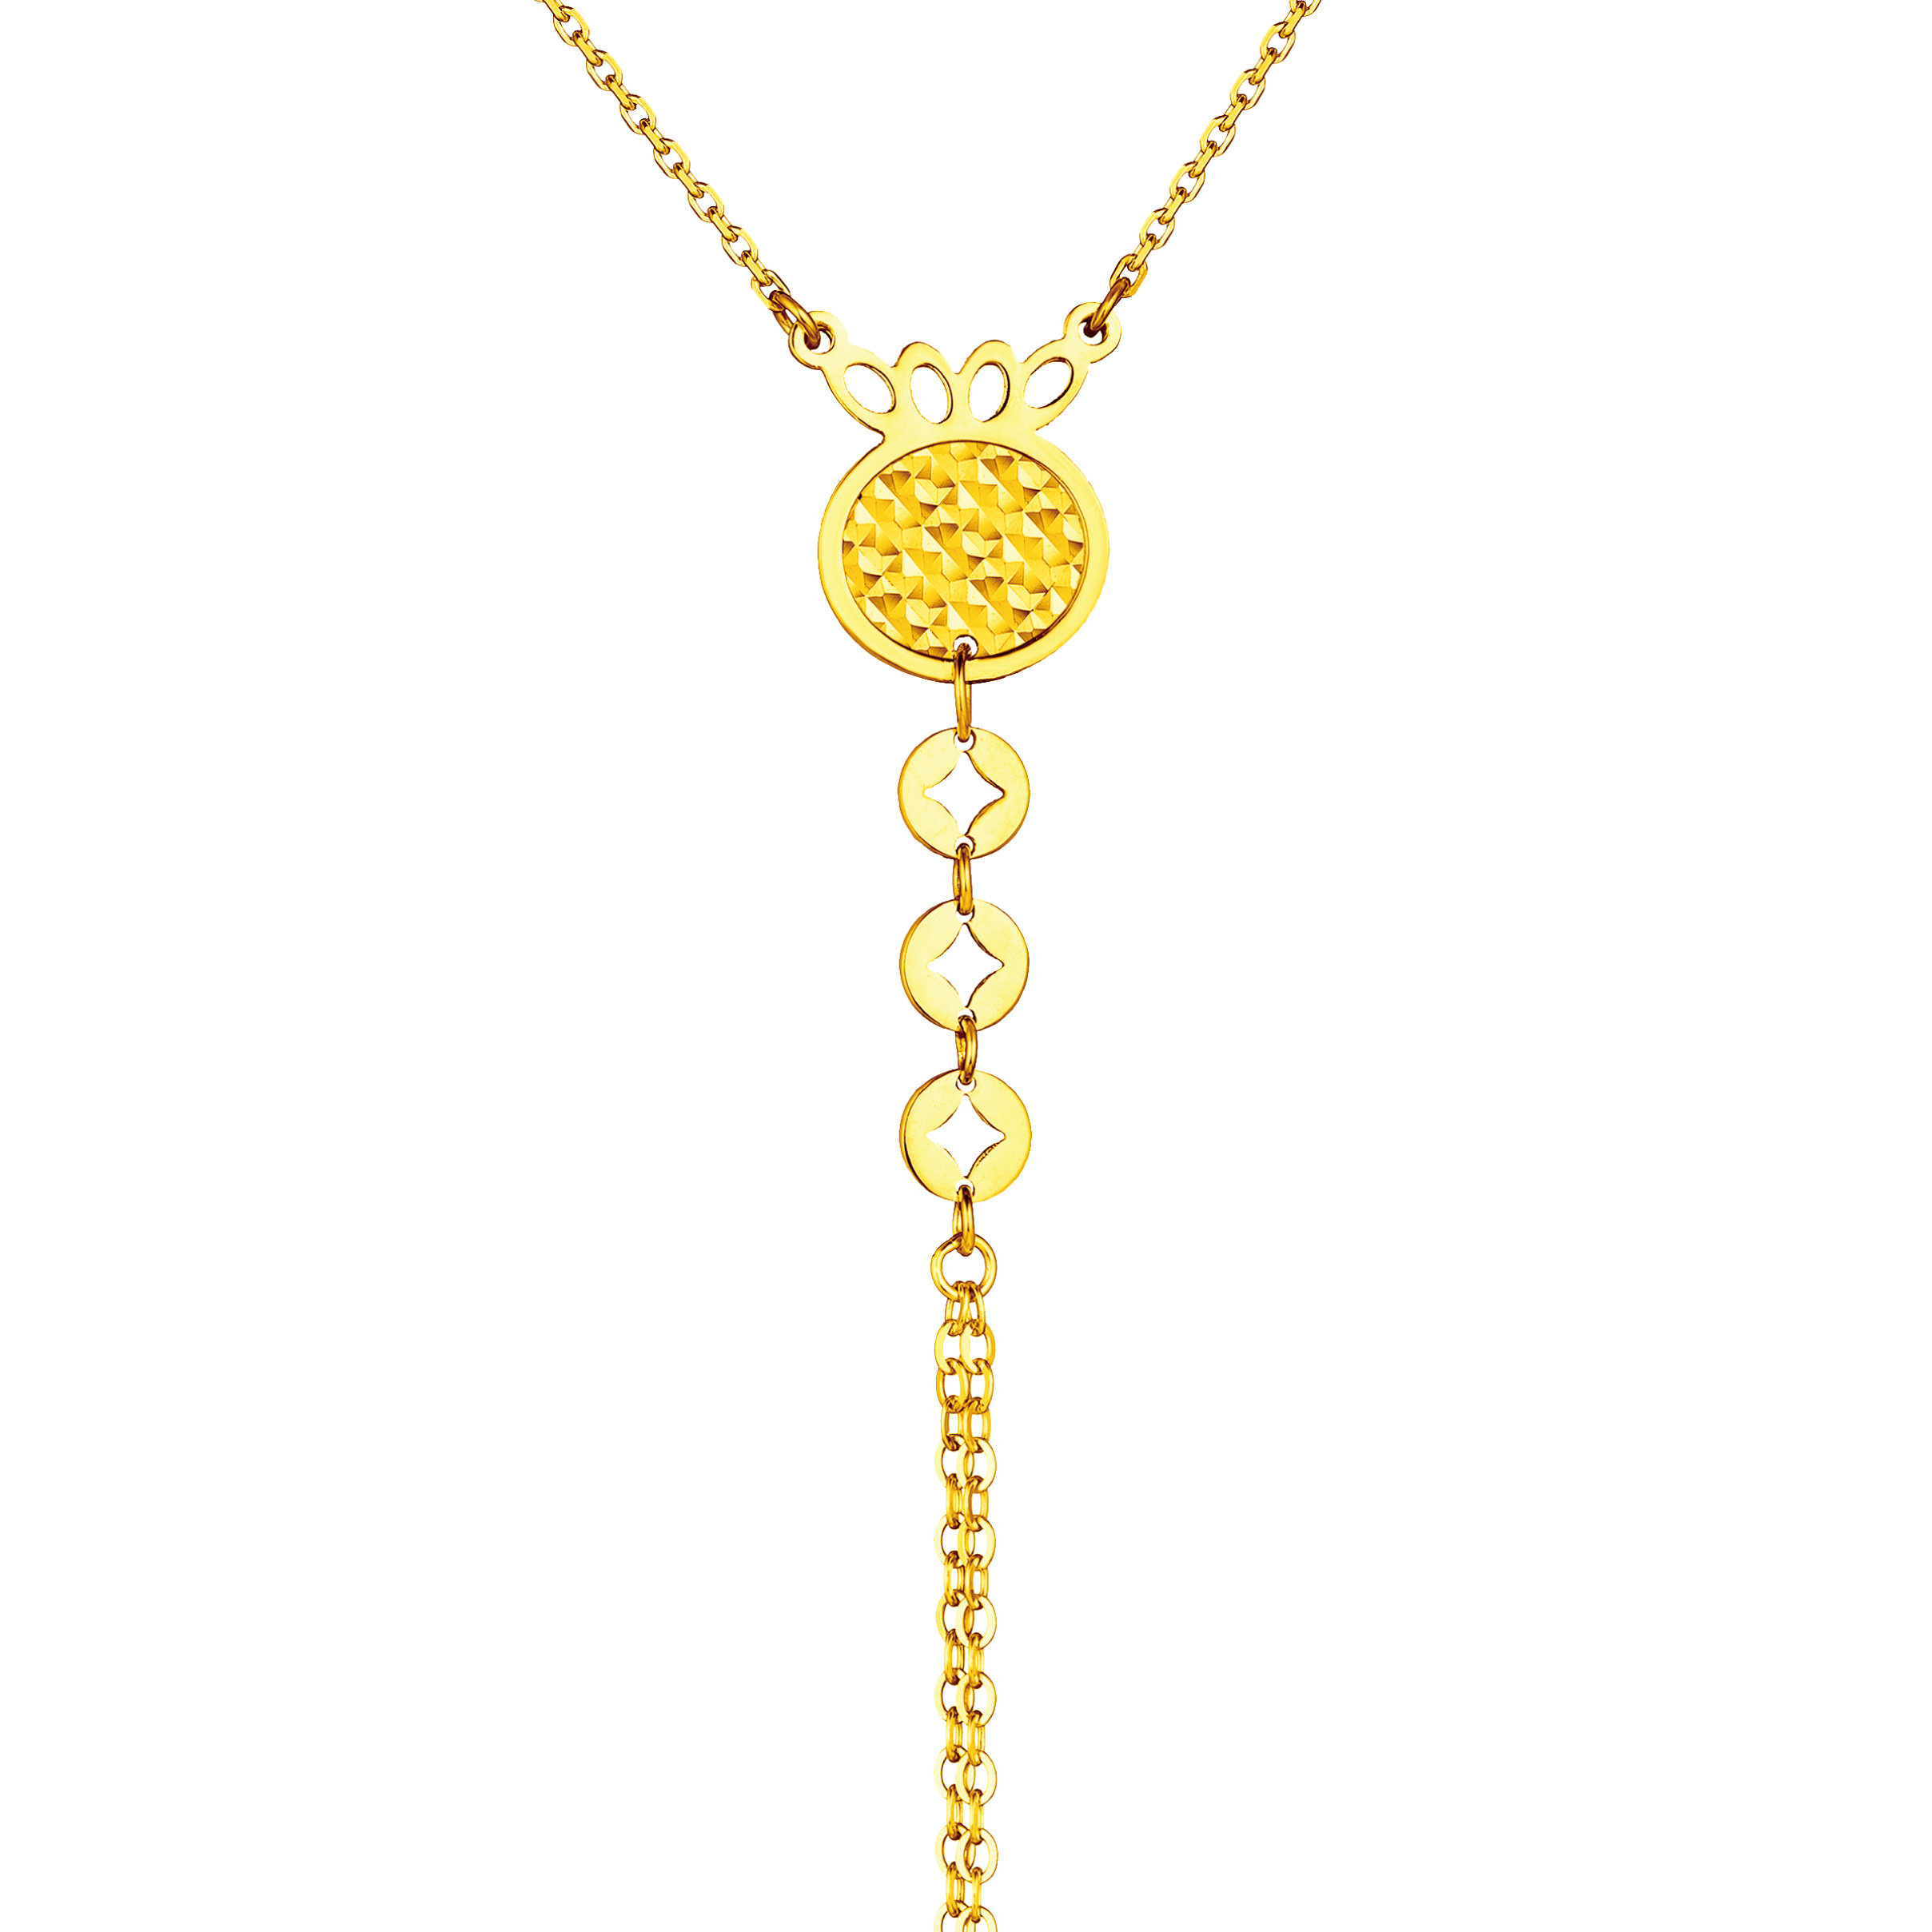 Goldstyle "Pineapple" Gold Necklace 